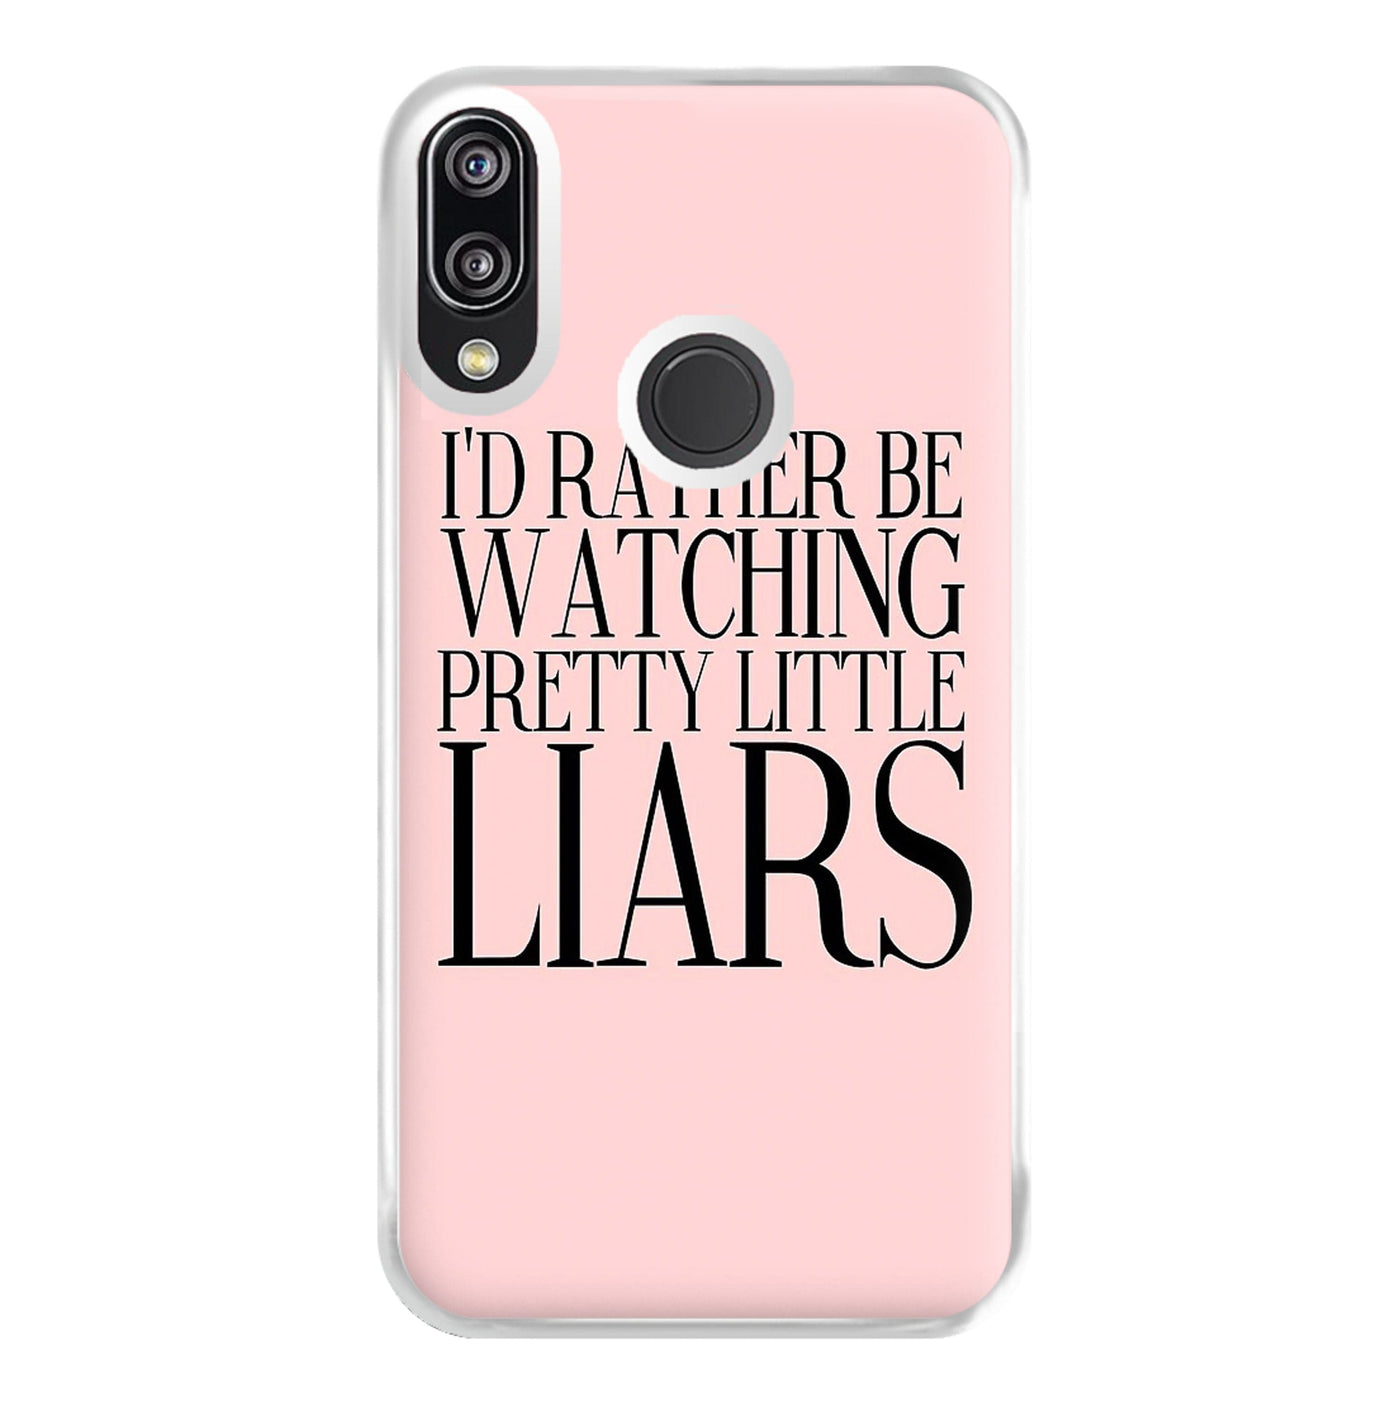 Rather Be Watching Pretty Little Liars... Phone Case